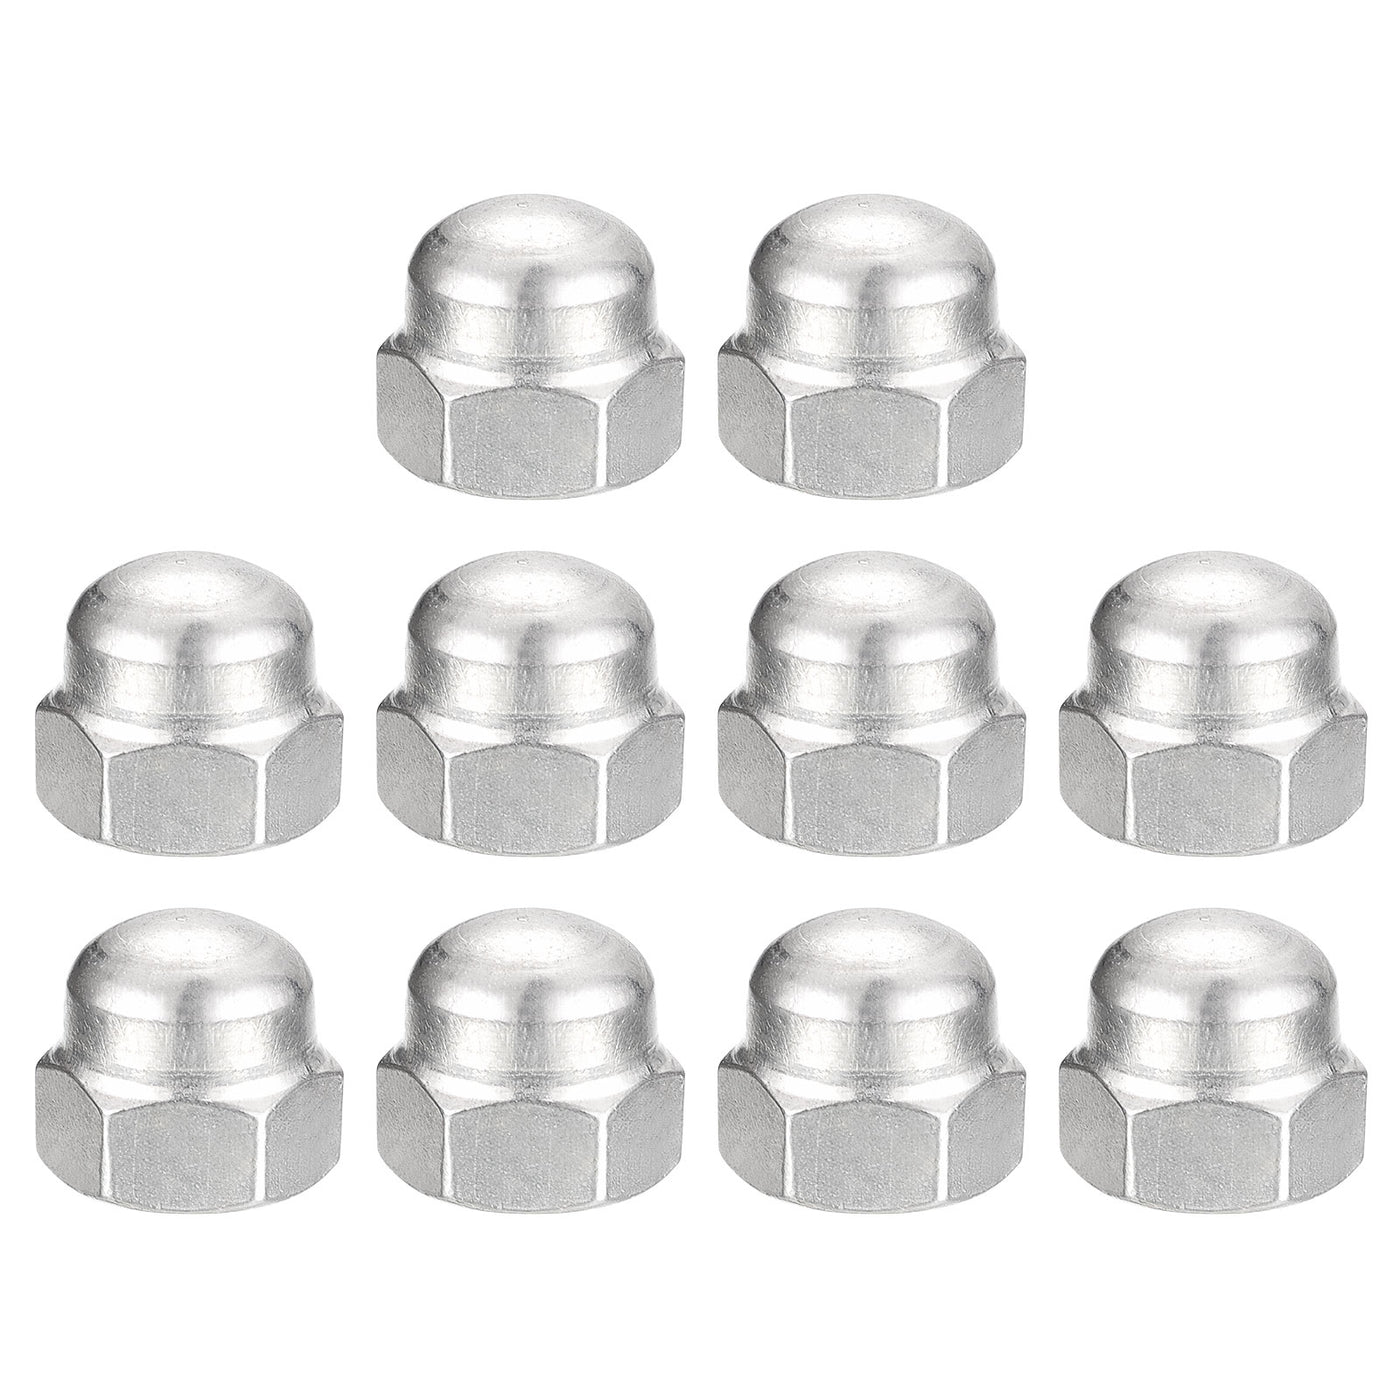 uxcell Uxcell 5/16-18 Acorn Cap Nuts,10pcs - 304 Stainless Steel Hardware Nuts, Acorn Hex Cap Dome Head Nuts for Fasteners (Silver)